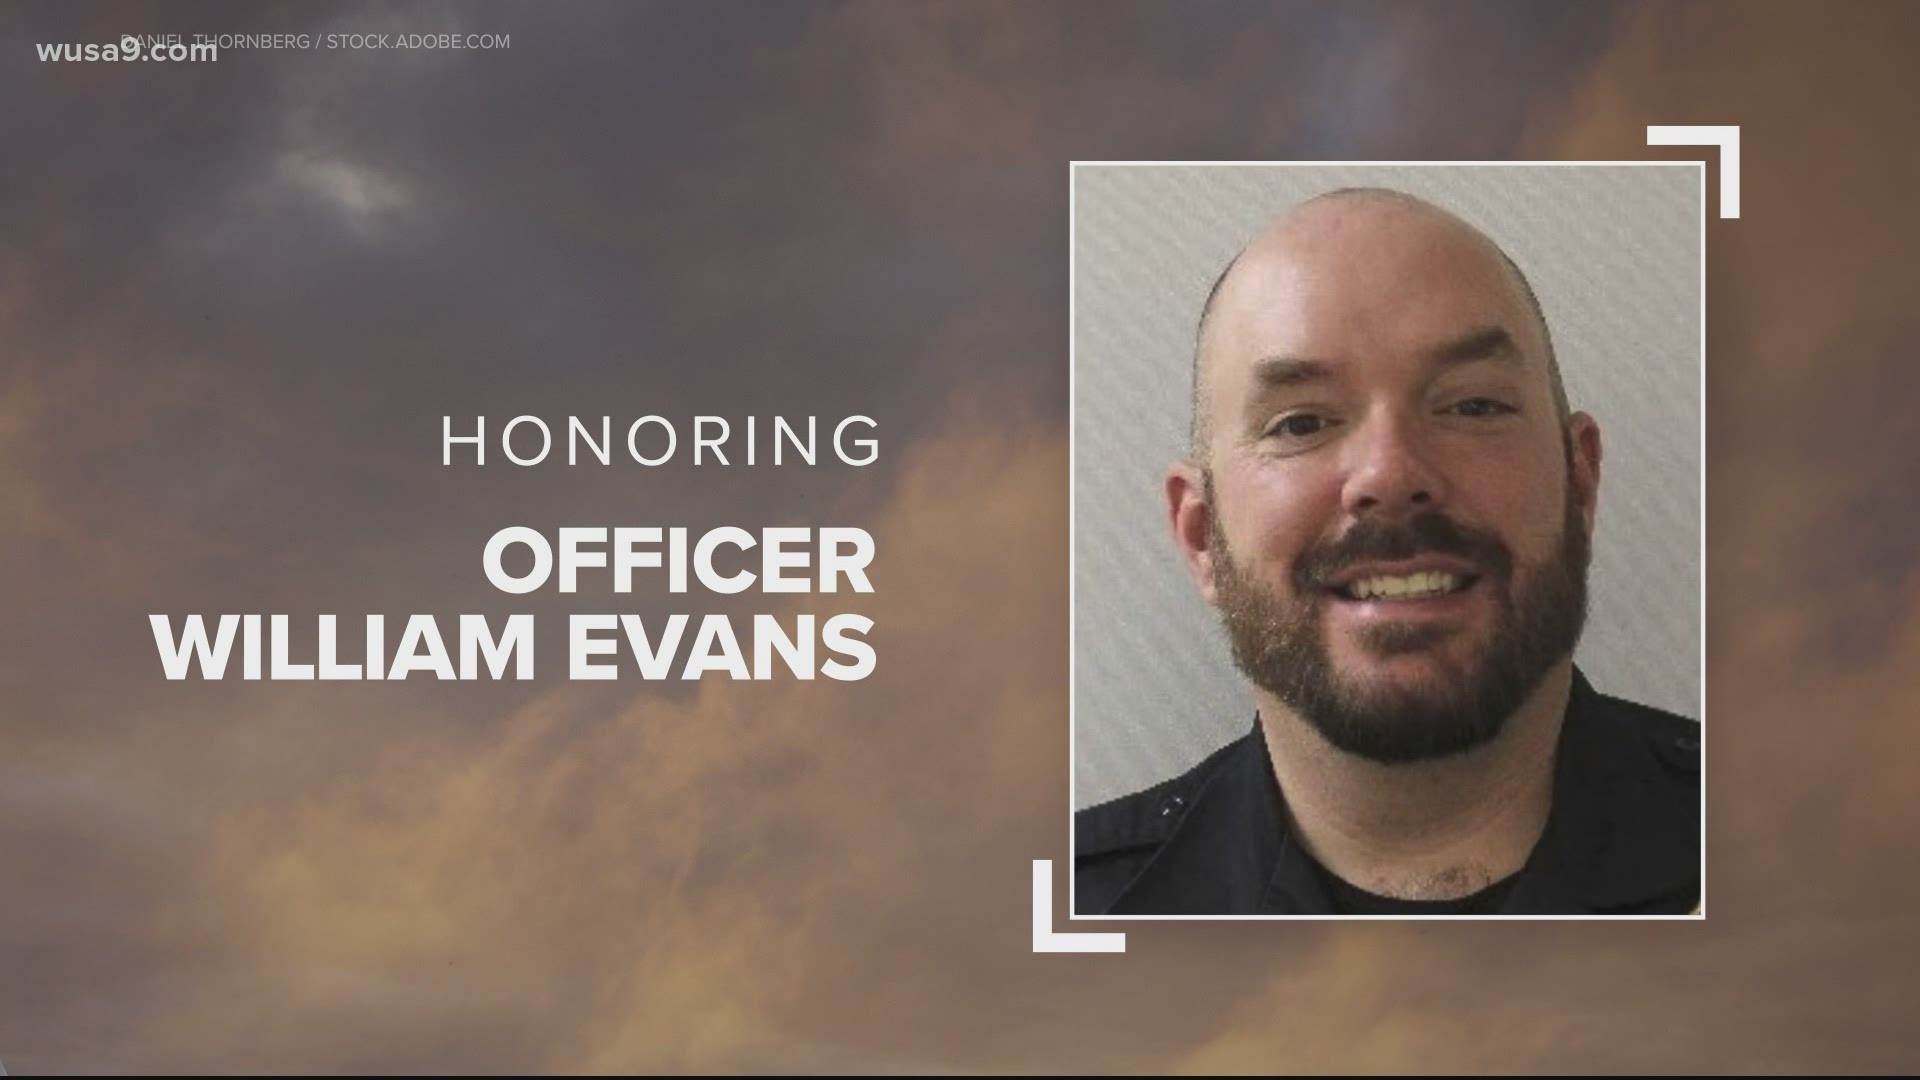 Officer William "Billy" Evans was an 18-year veteran of the police department.